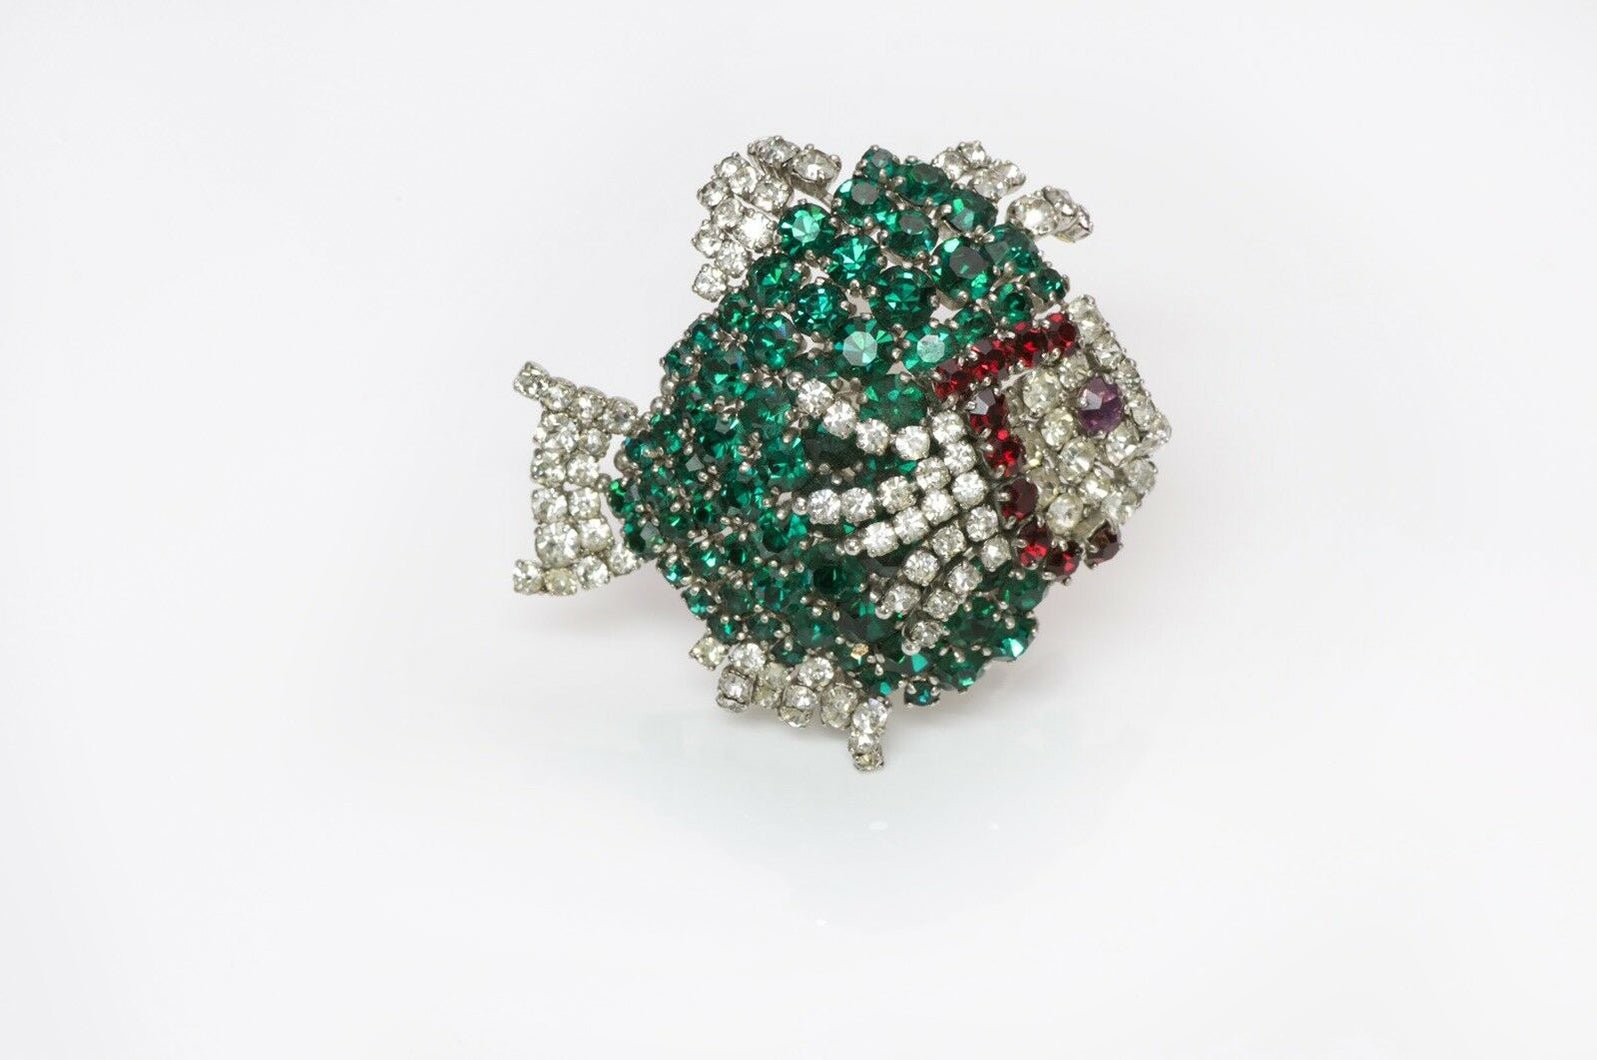 Christian Dior Henkel and Grosse 1961 Green Crystal Fish Brooch - DSF Antique Jewelry